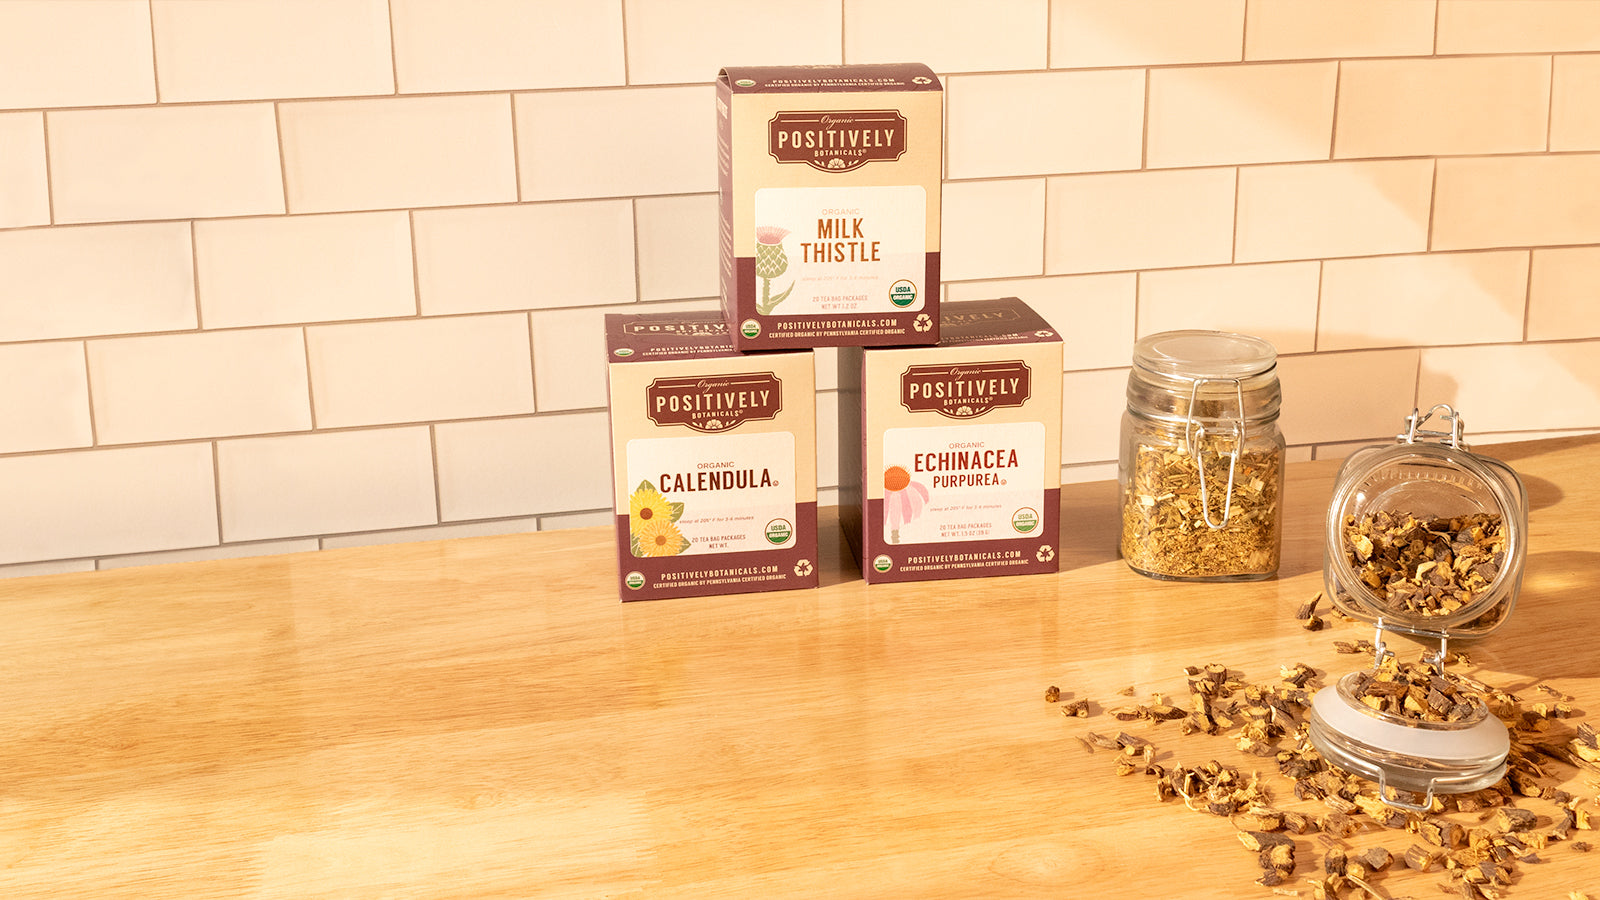 Health and wellness centered botanicals in a warm kitchen scene. 3 different boxes accompanied by 2 jars